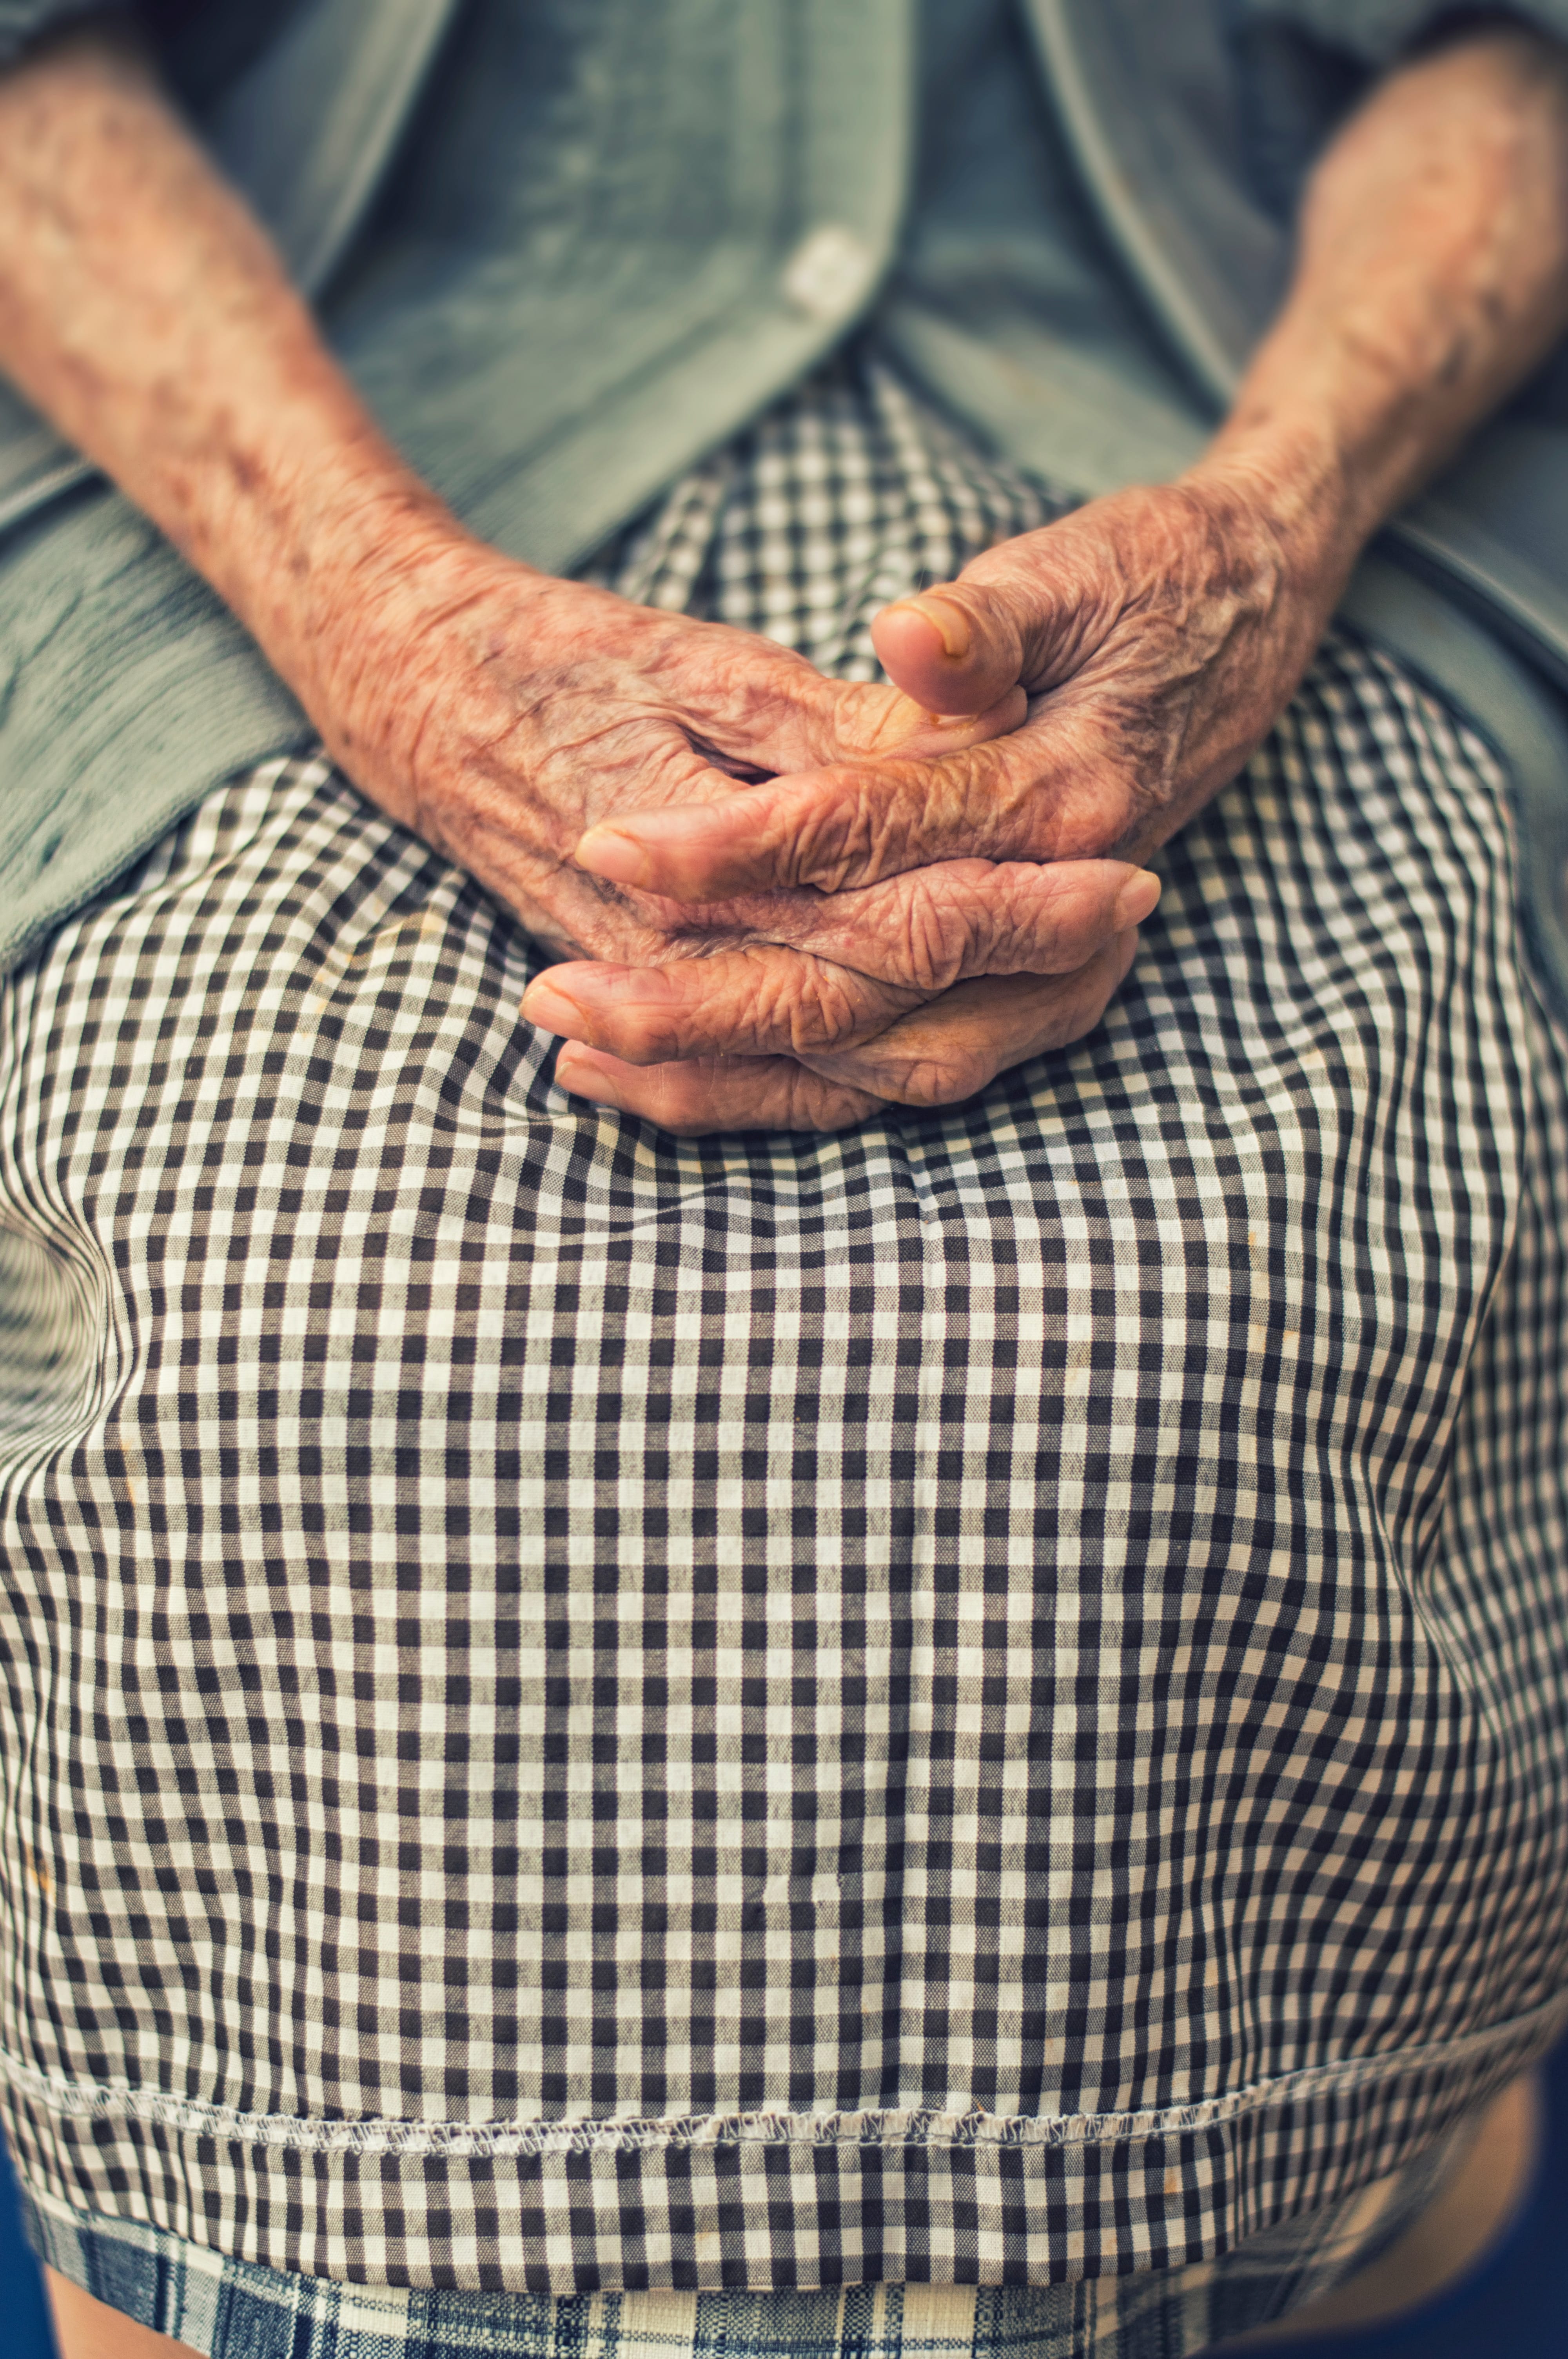 Elderly woman with hands folded in her lap; image by Cristian Newman, via Unsplash.com.